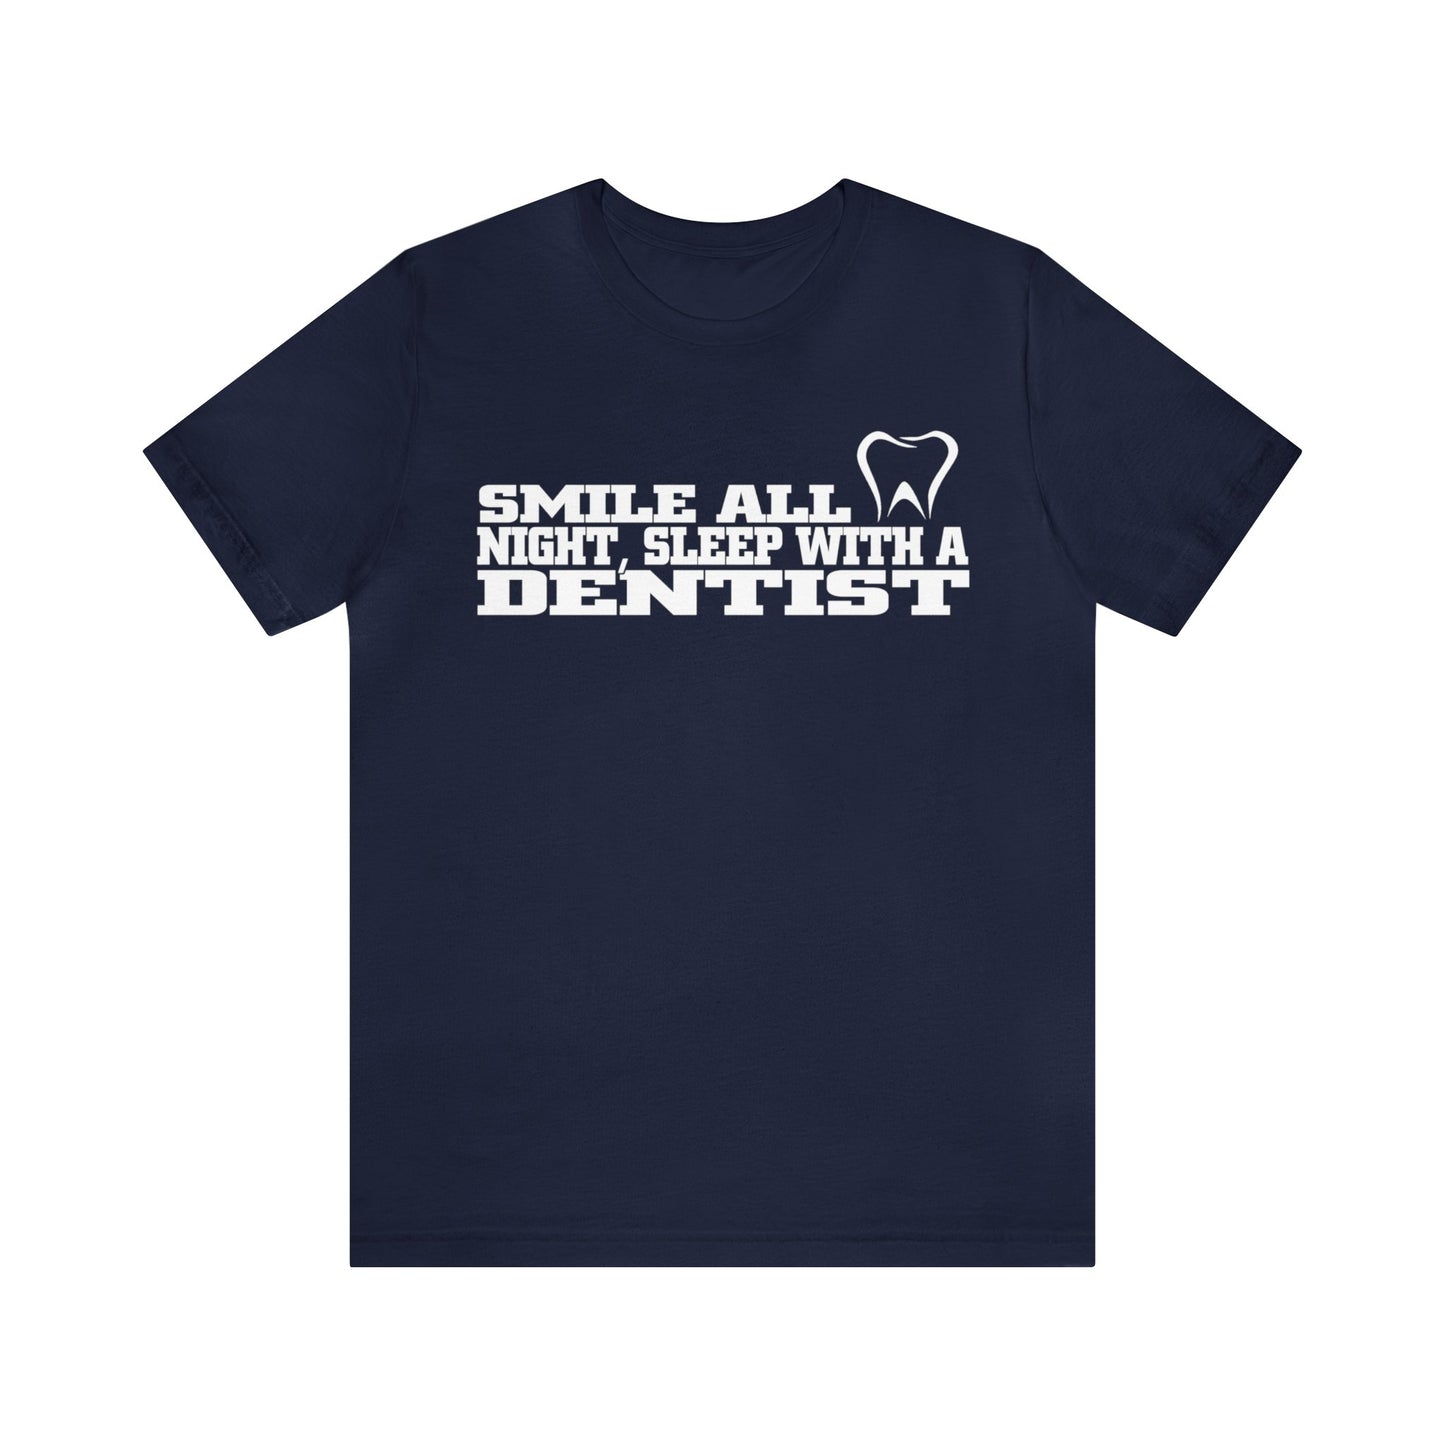 Sleep in Style with our Smile All Night, with a Dentist T-Shirts